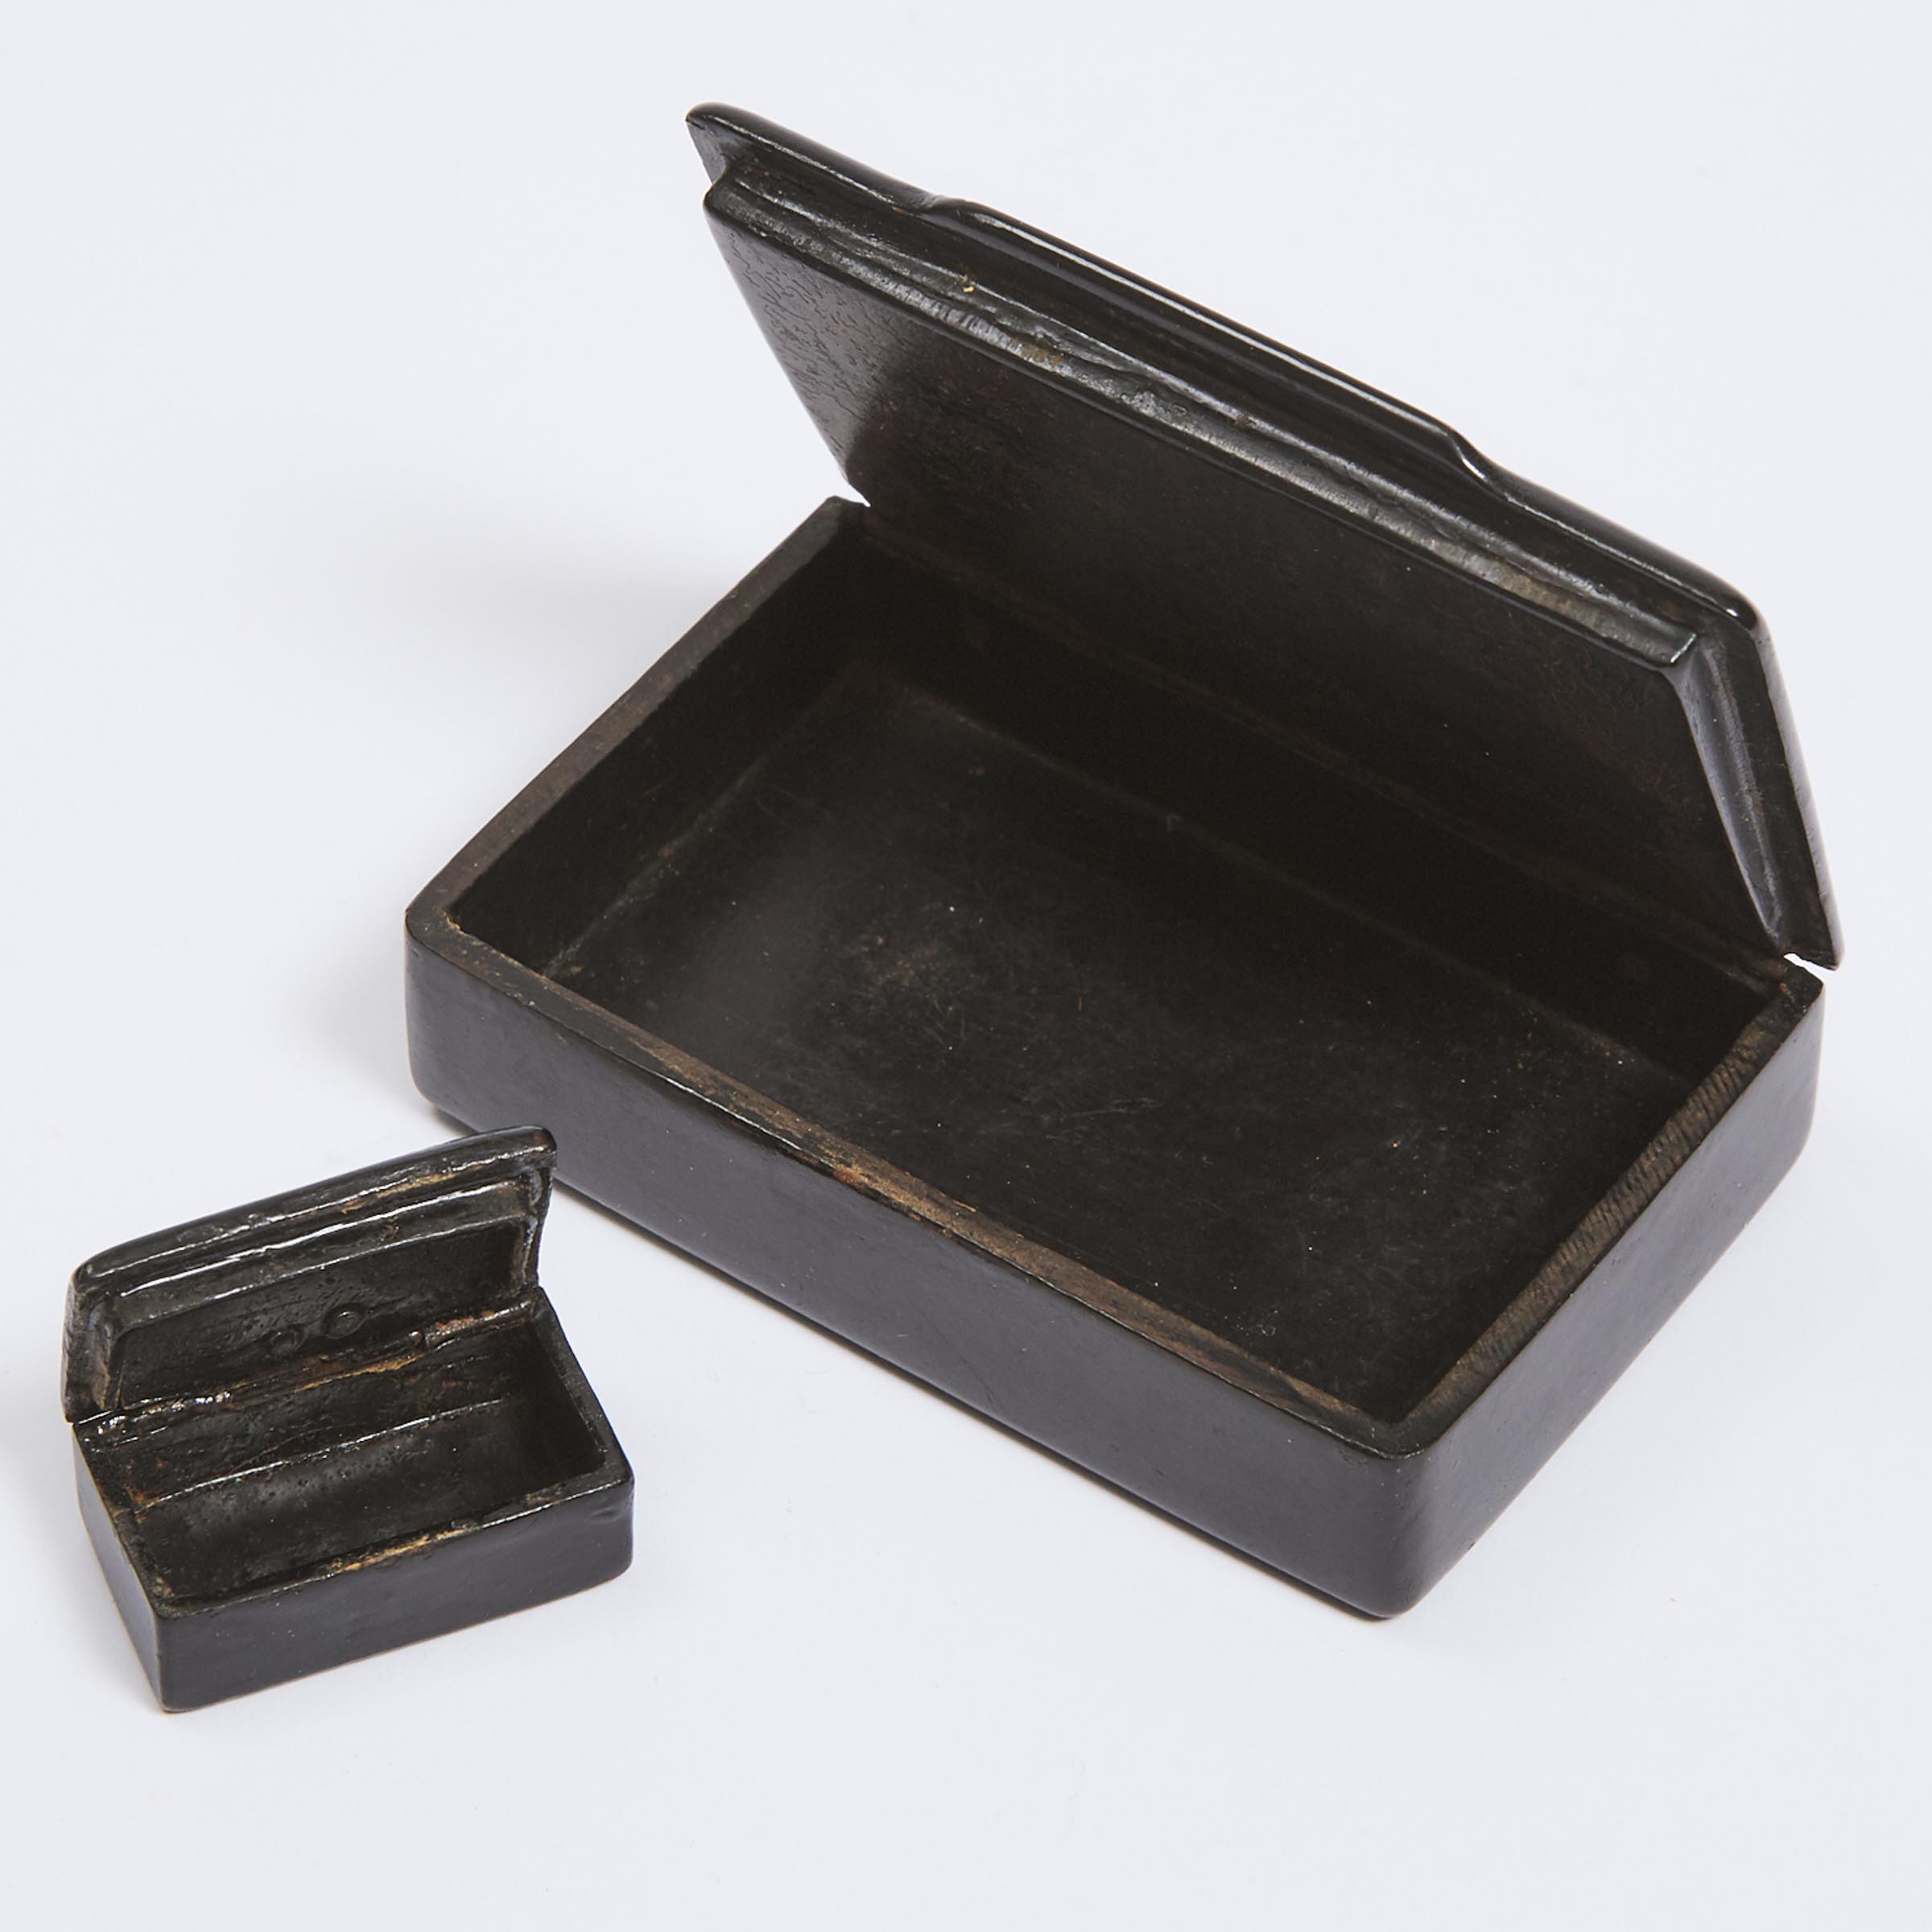 Two English Lacquer Snuff Boxes, early 19th century